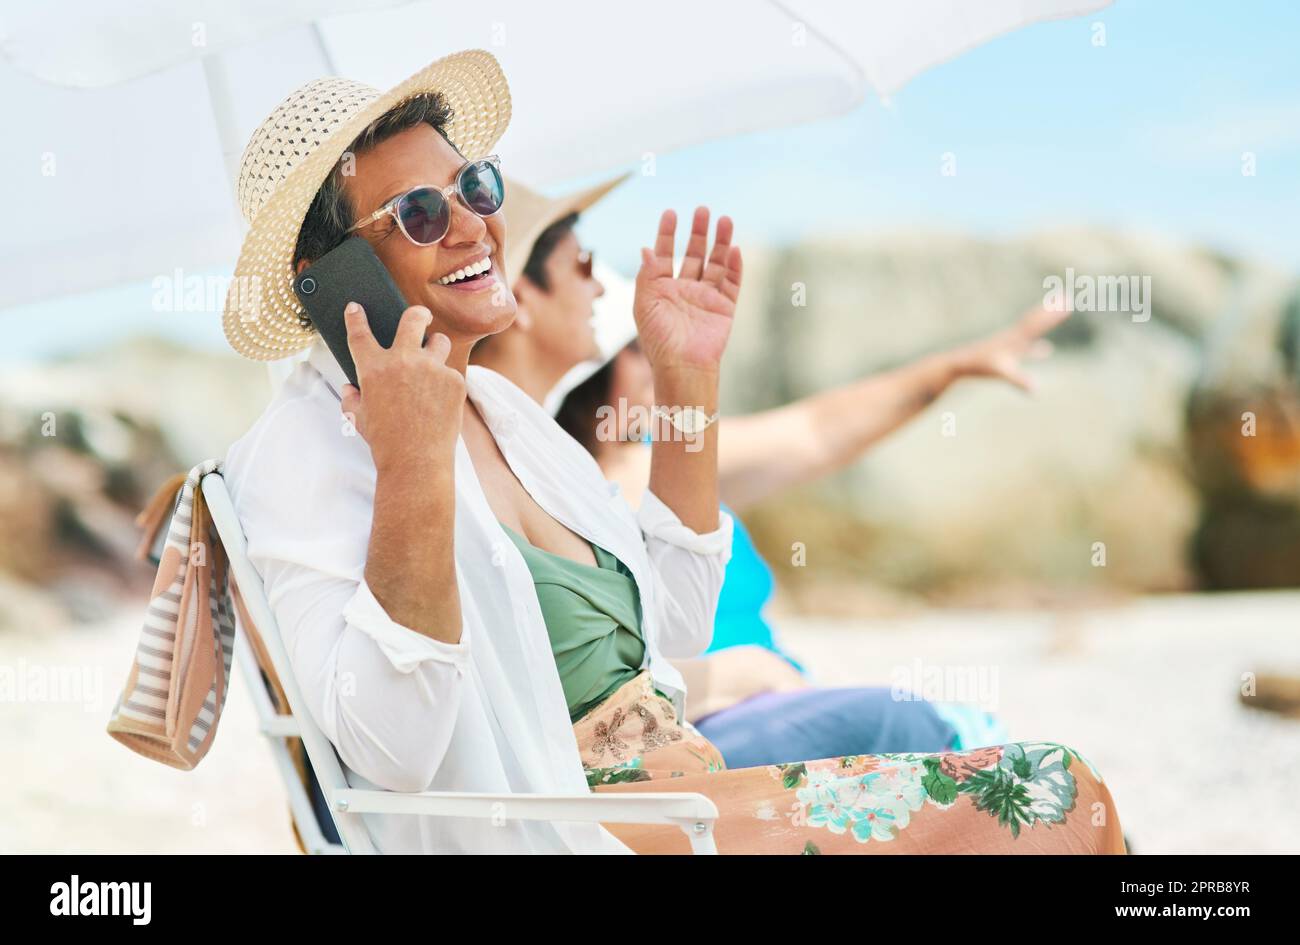 Were having the best day out here. a mature woman sitting alone and using her cellphone during a day out on the beach with friends. Stock Photo